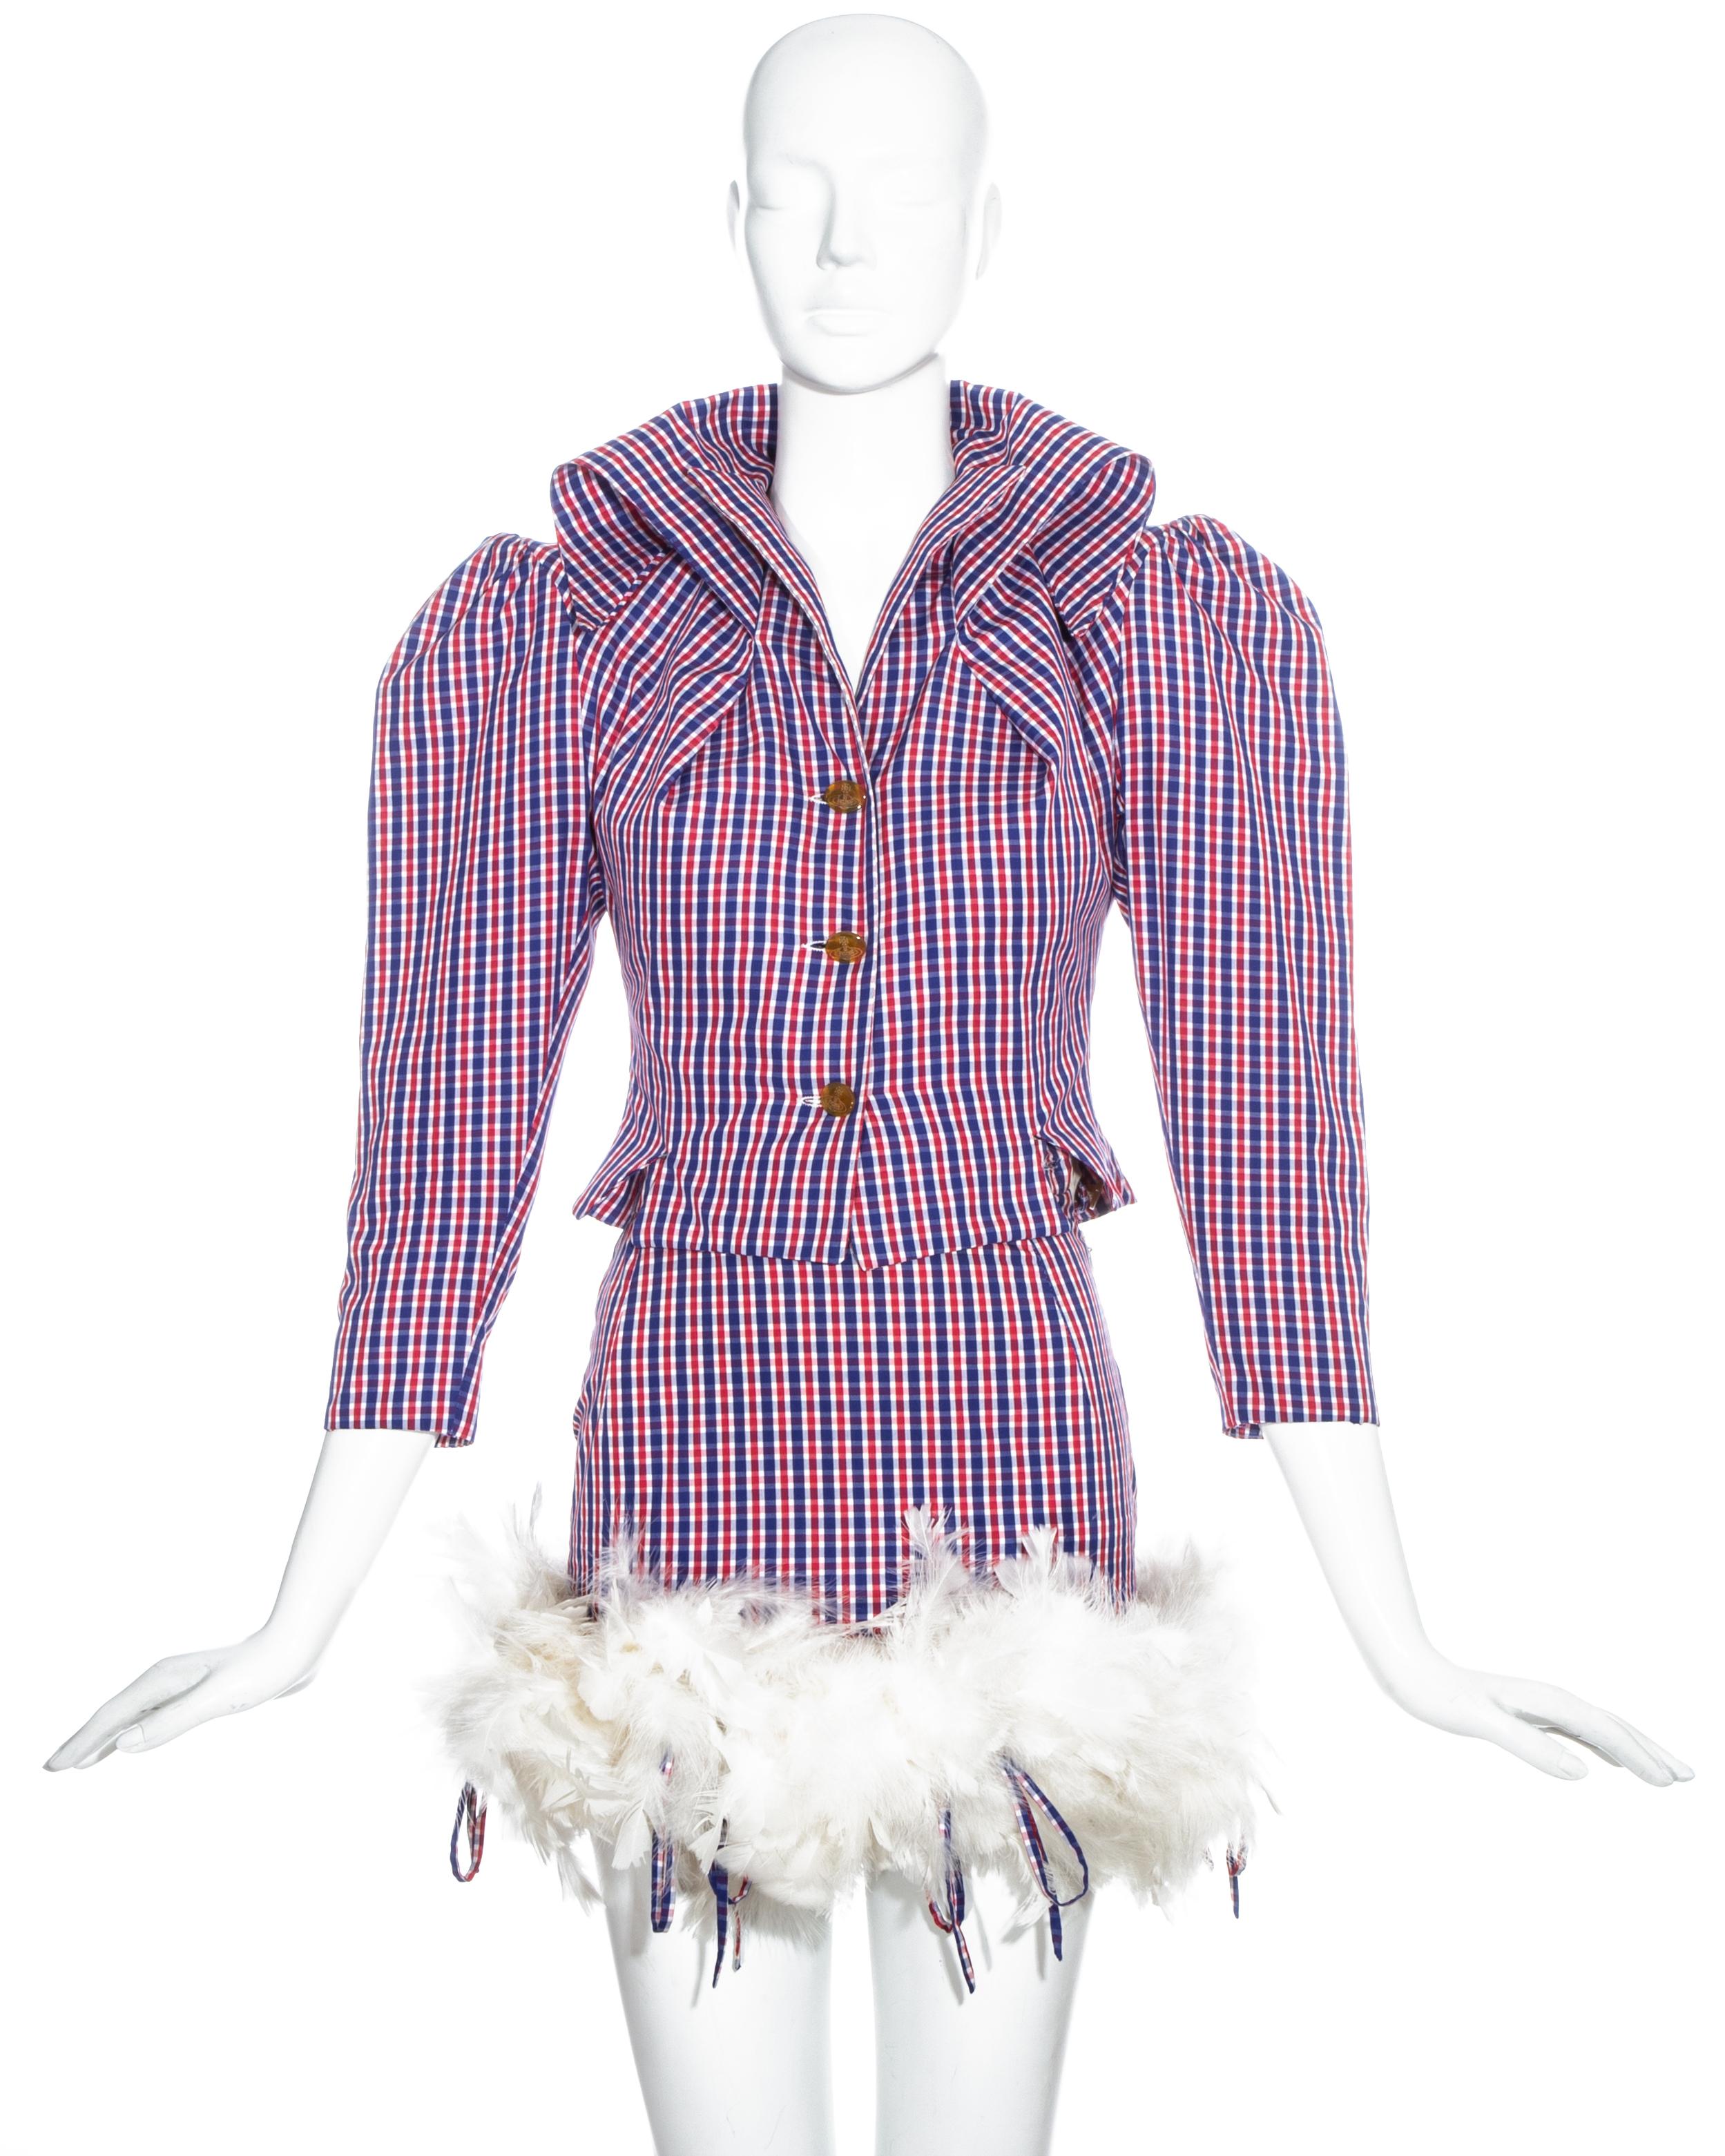 Vivienne Westwood checked cotton 'Cafe Society' skirt suit comprising: fitted jacket with large shoulder pads, extra long collar and orb button closures. Micro mini skirt with feathered hem attached with long string fastenings. 

Spring-Summer 1994